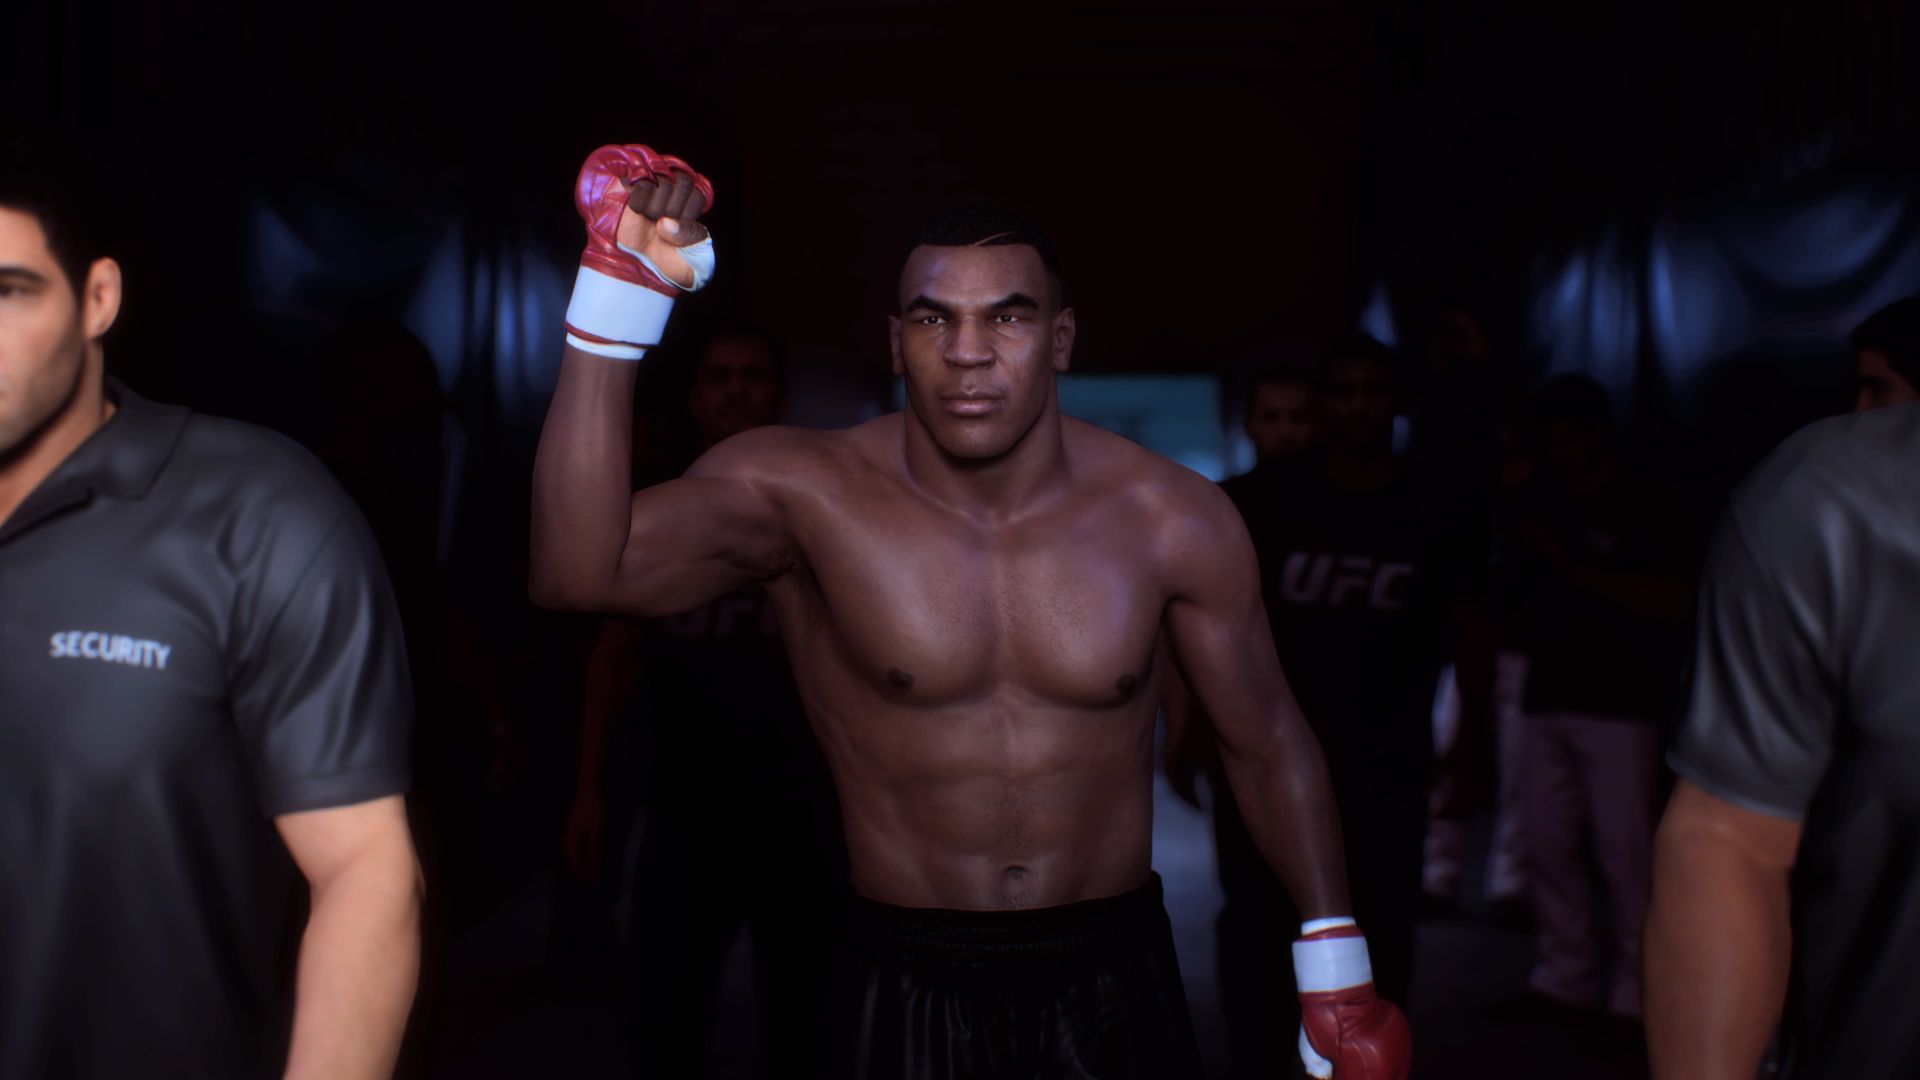 Screenshot from UFC 5 shows boxer Mike Tyson walkout out towards the octagon with one fist clenched held into the air while he's escorted to the ring by secruity.